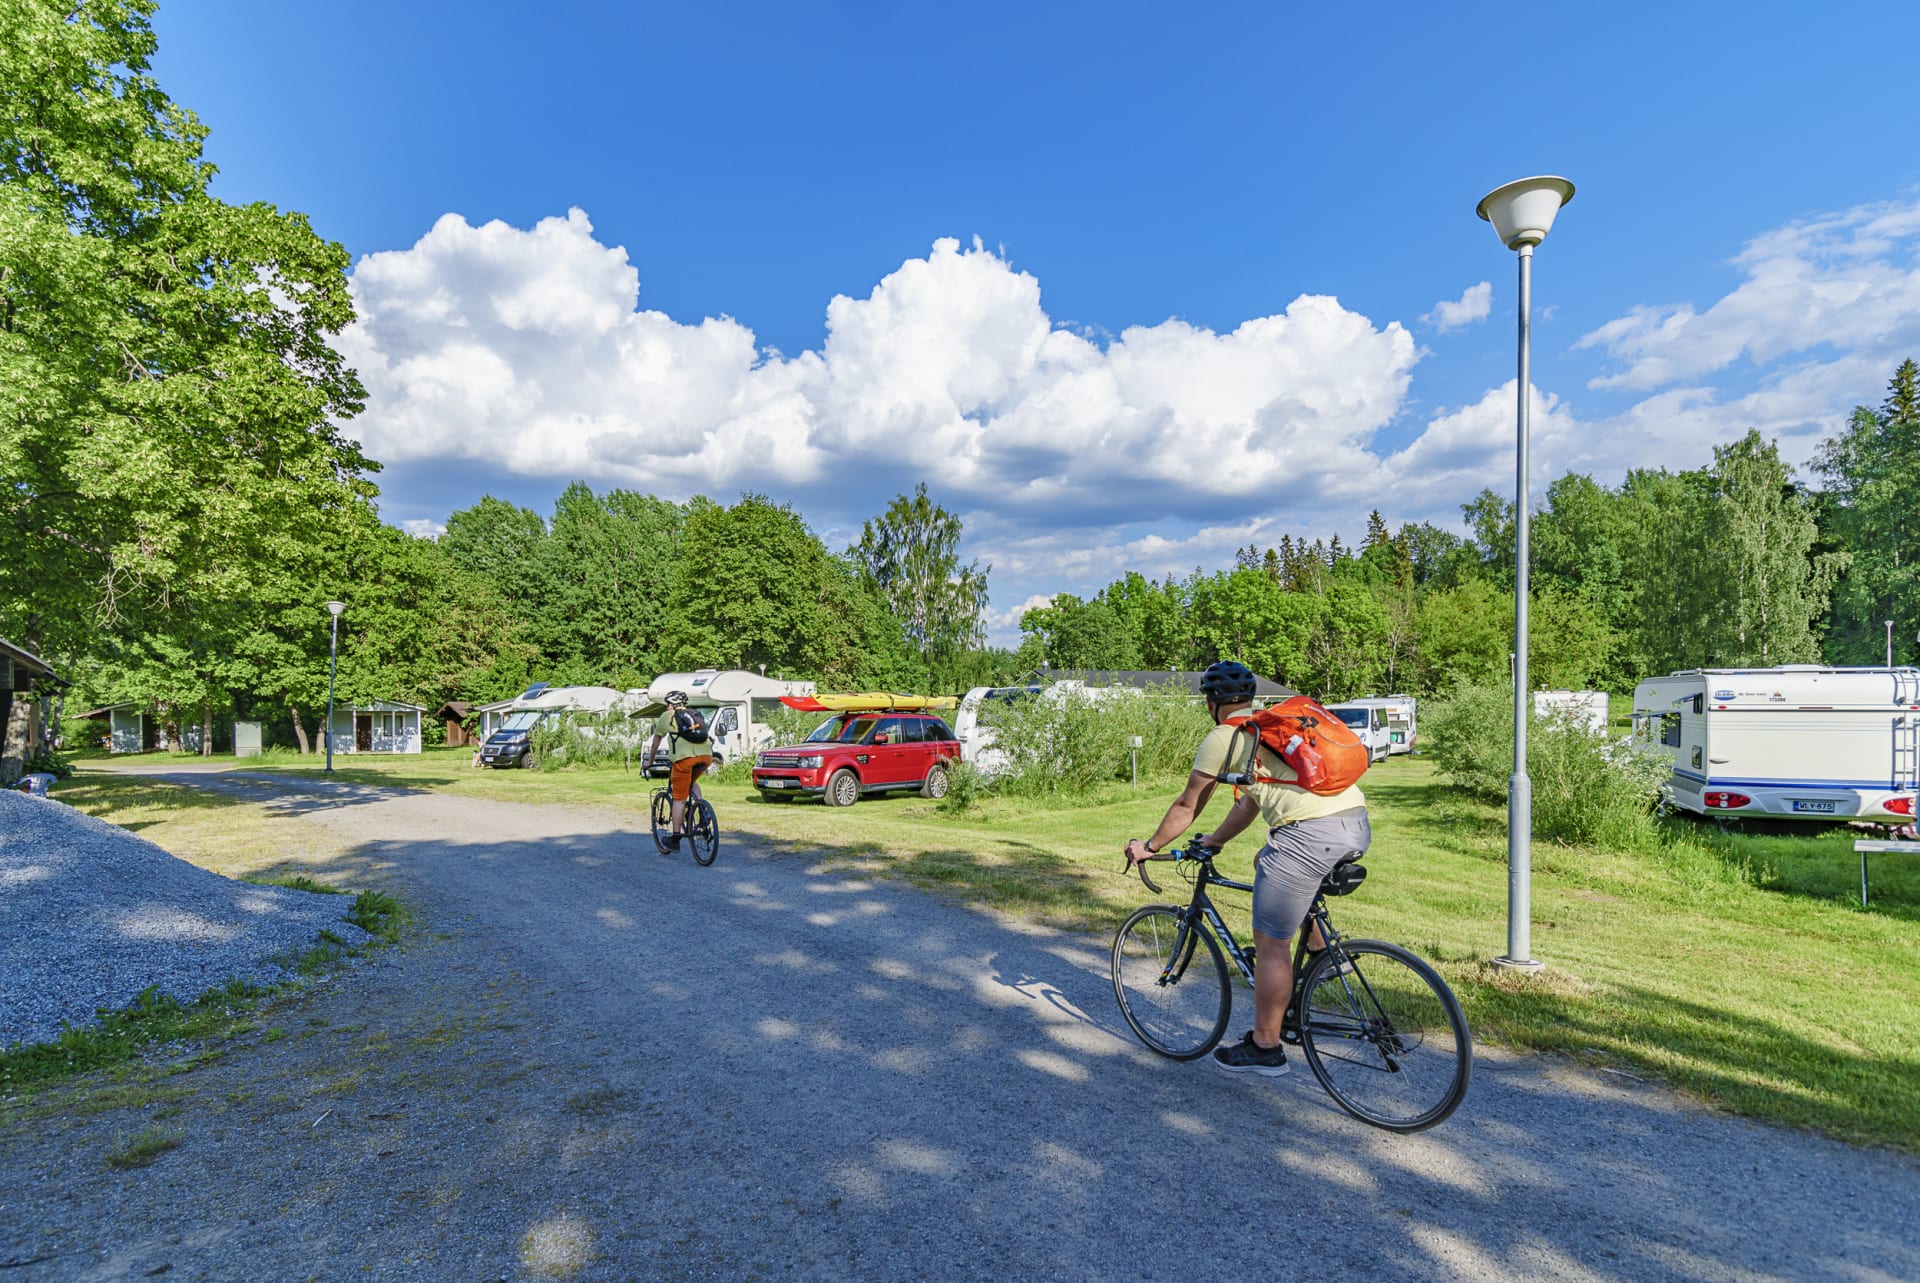 2 persons are cycling at the camping site.